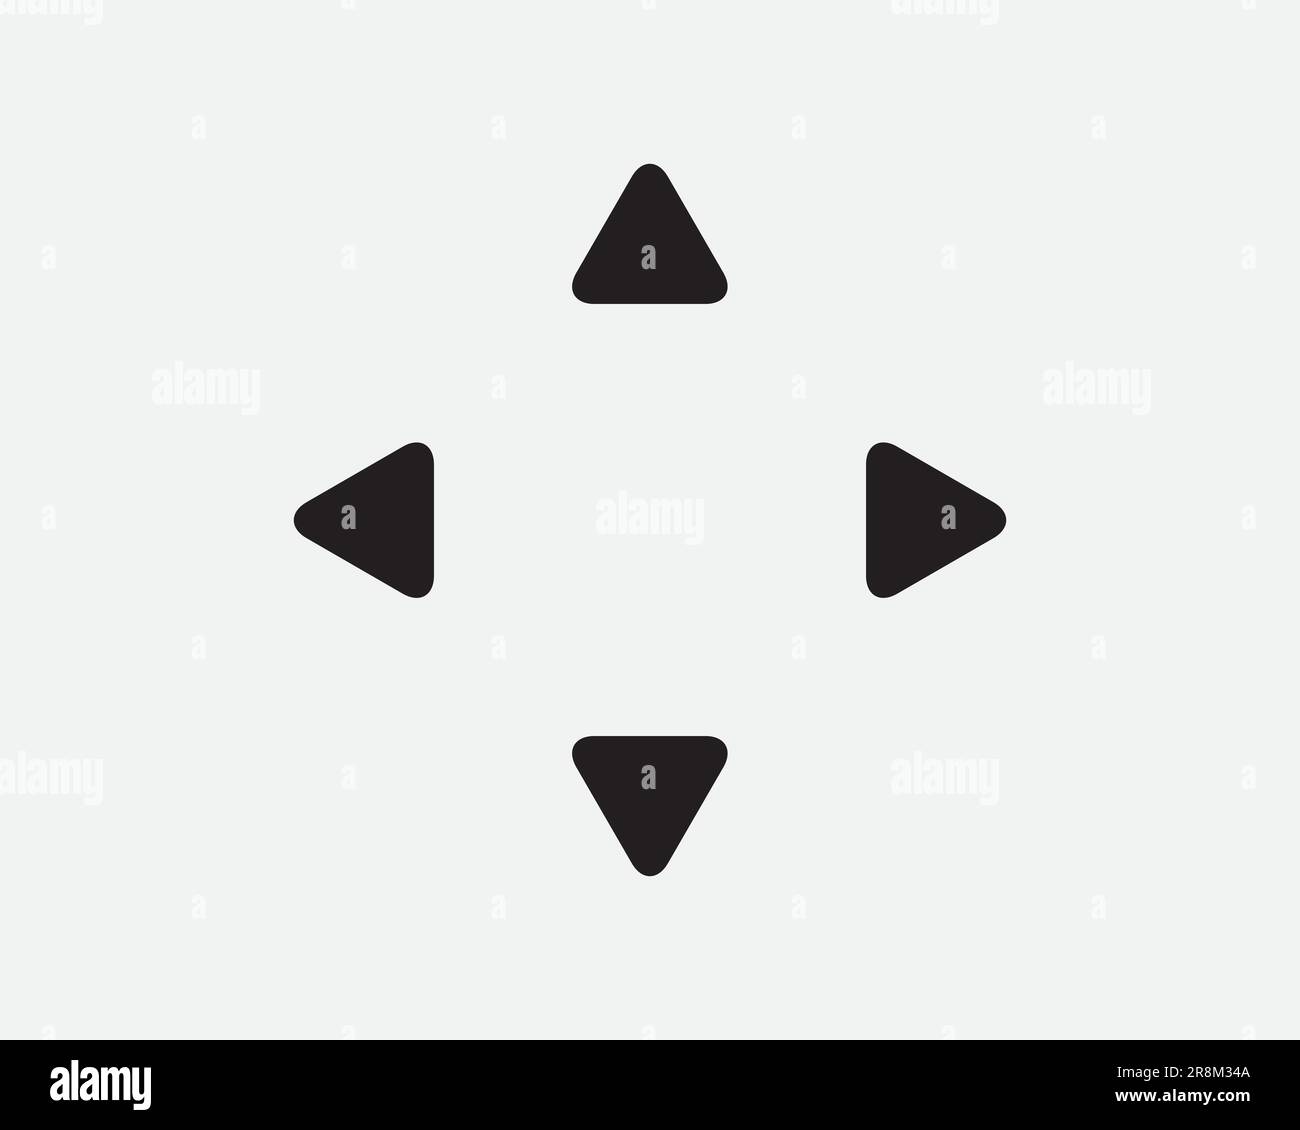 Up Down Left Right Arrow Icon. Four Direction Navigation Zoom In Out Triangle Black White Sign Symbol Illustration Artwork Graphic Clipart EPS Vector Stock Vector